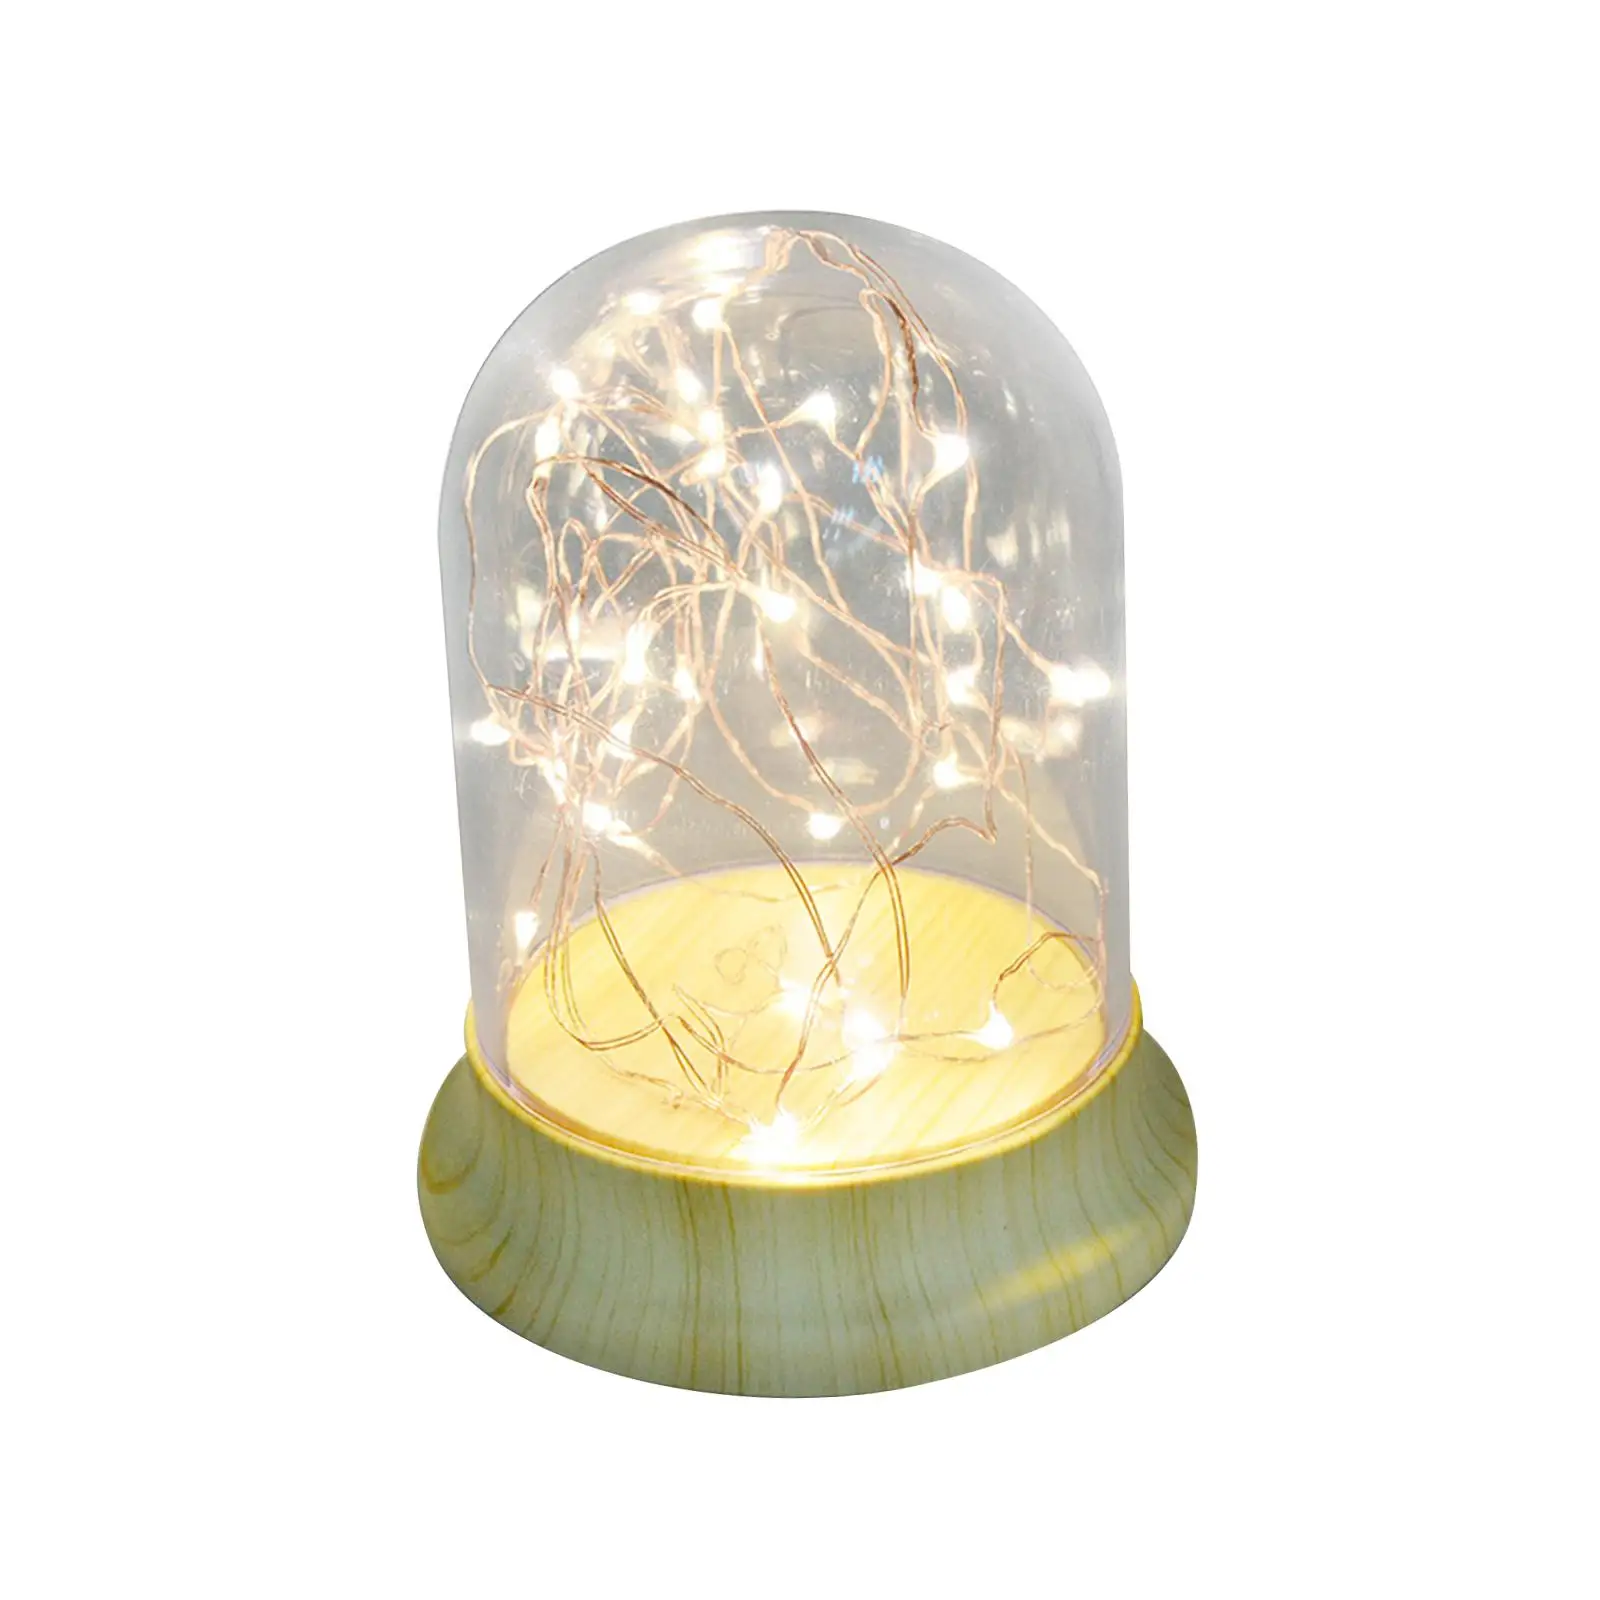 Dome Night Lights DIY Table Night Lamp Eternal LED Atmosphere Lamp for Holiday Room Dining Room Anniversary Birthday Gift